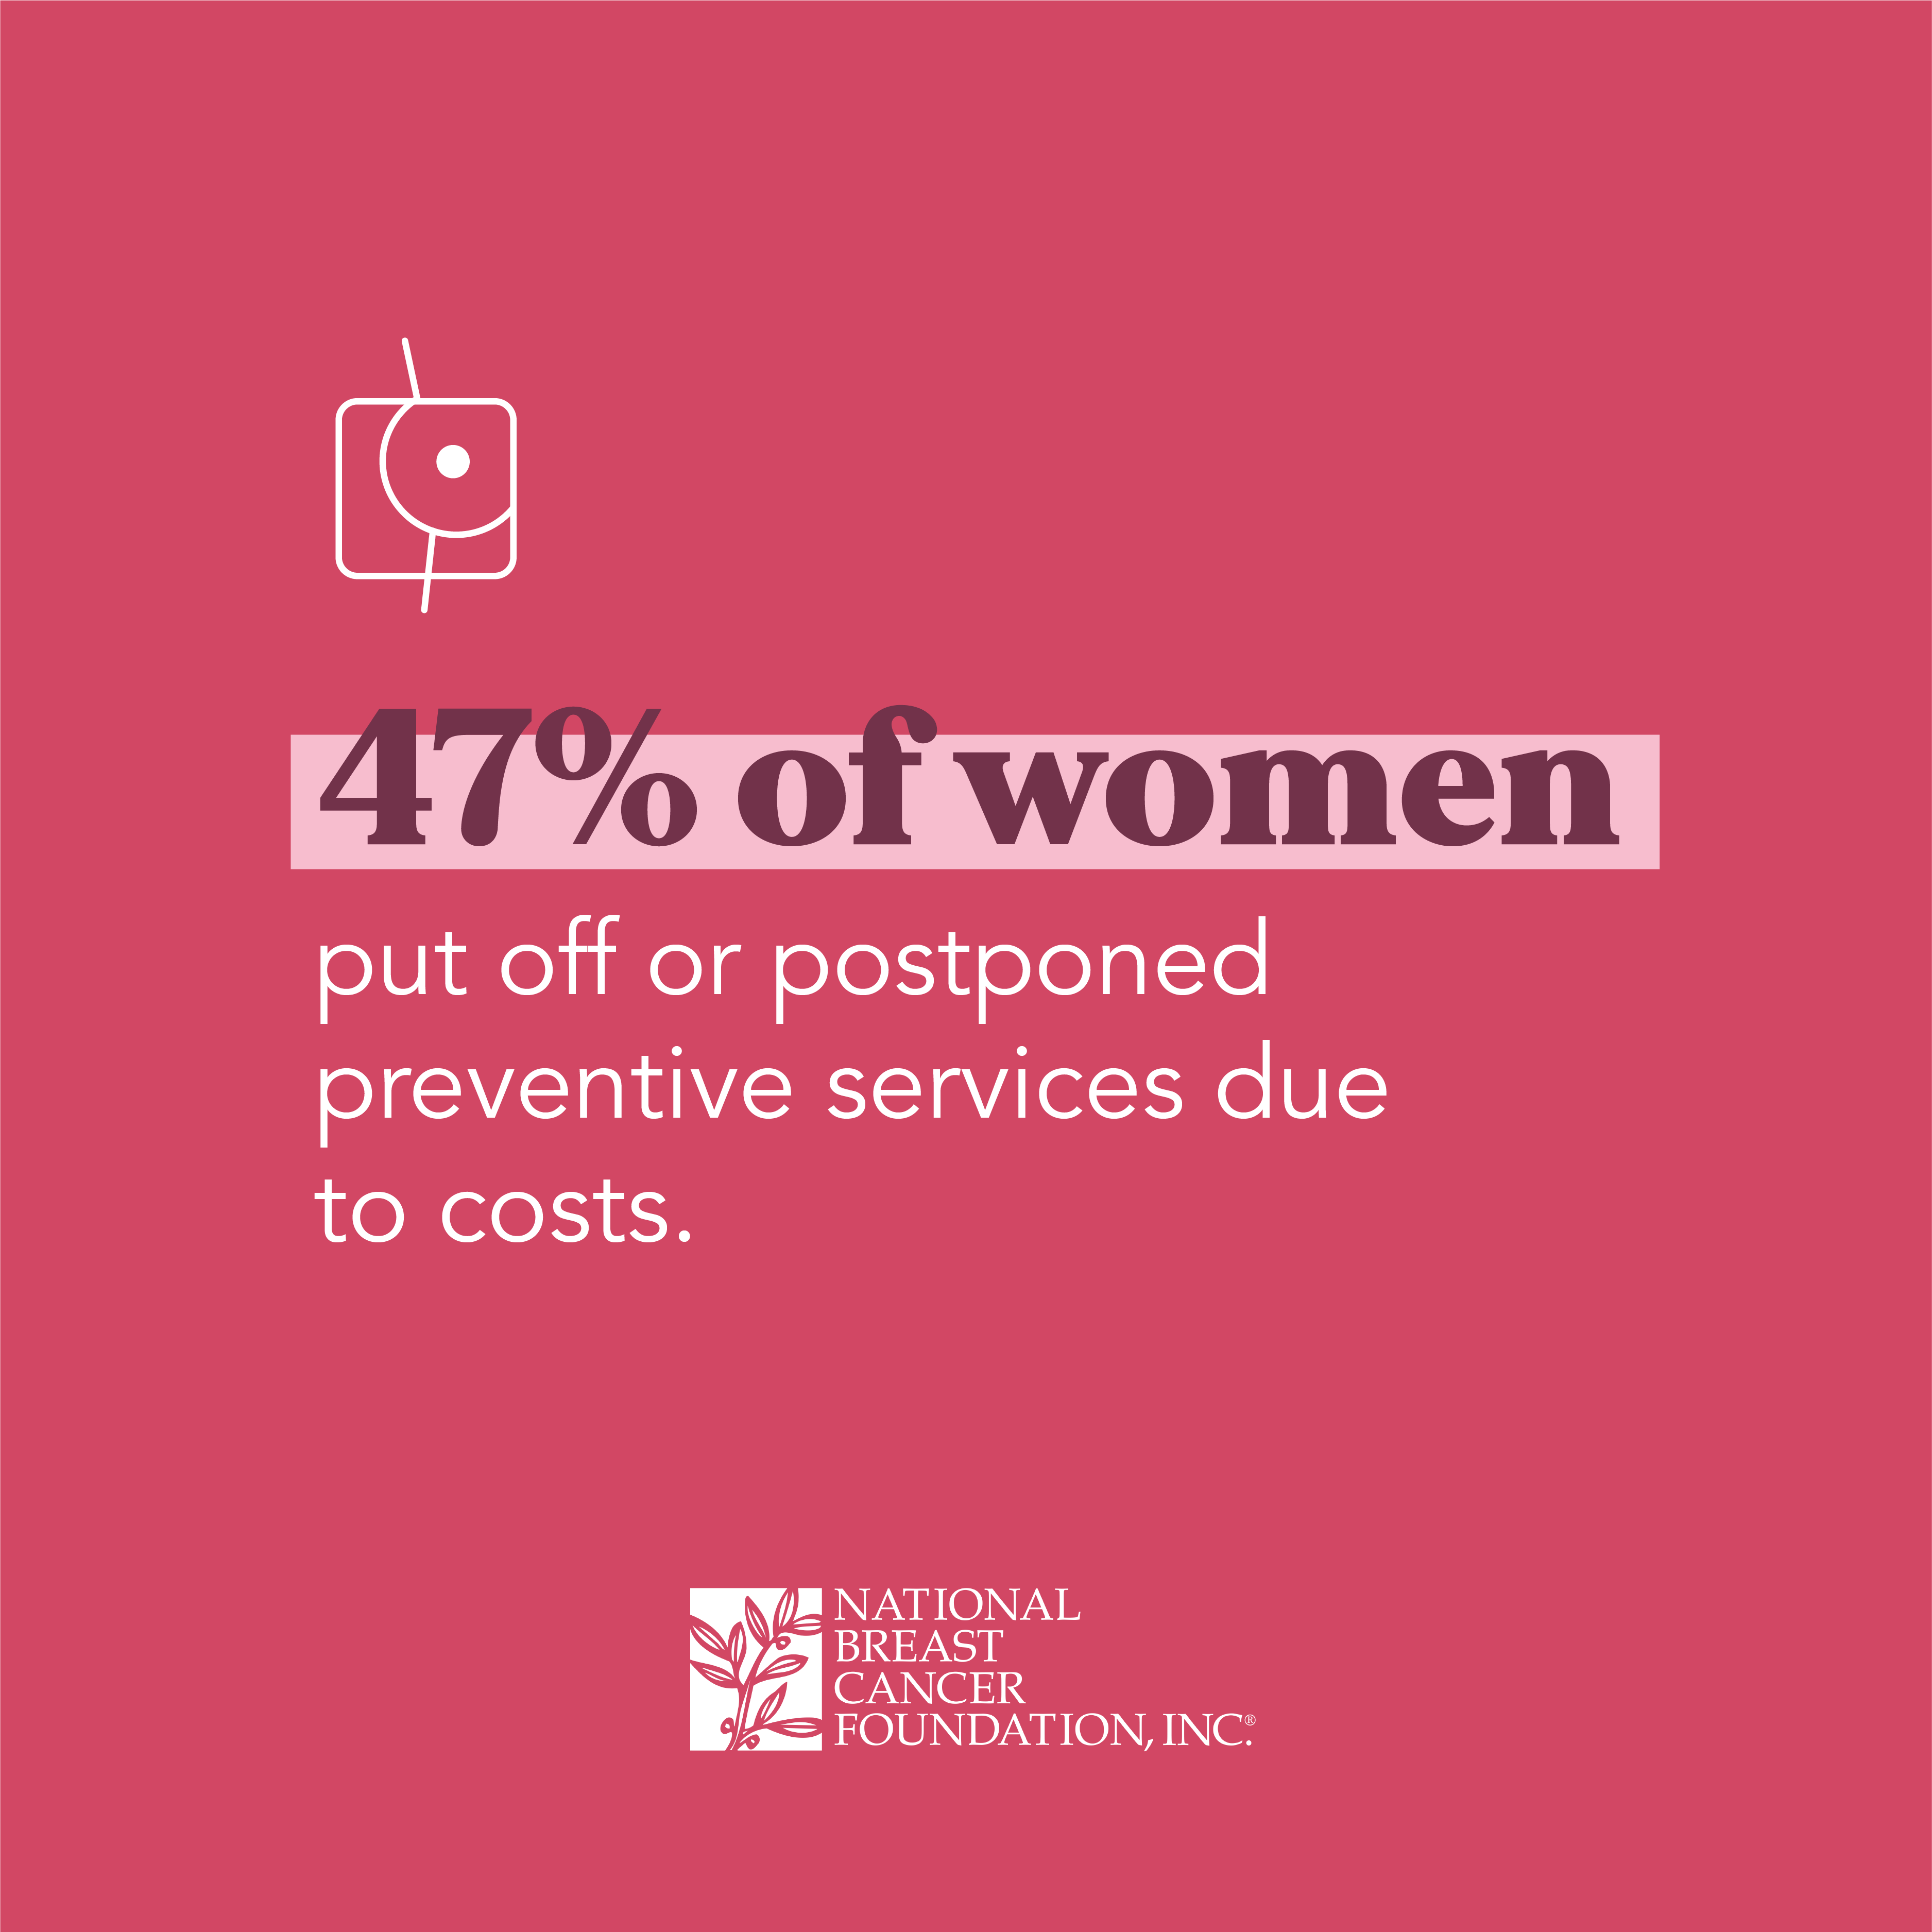 47 percent of women put off or postponed preventive services due to cost